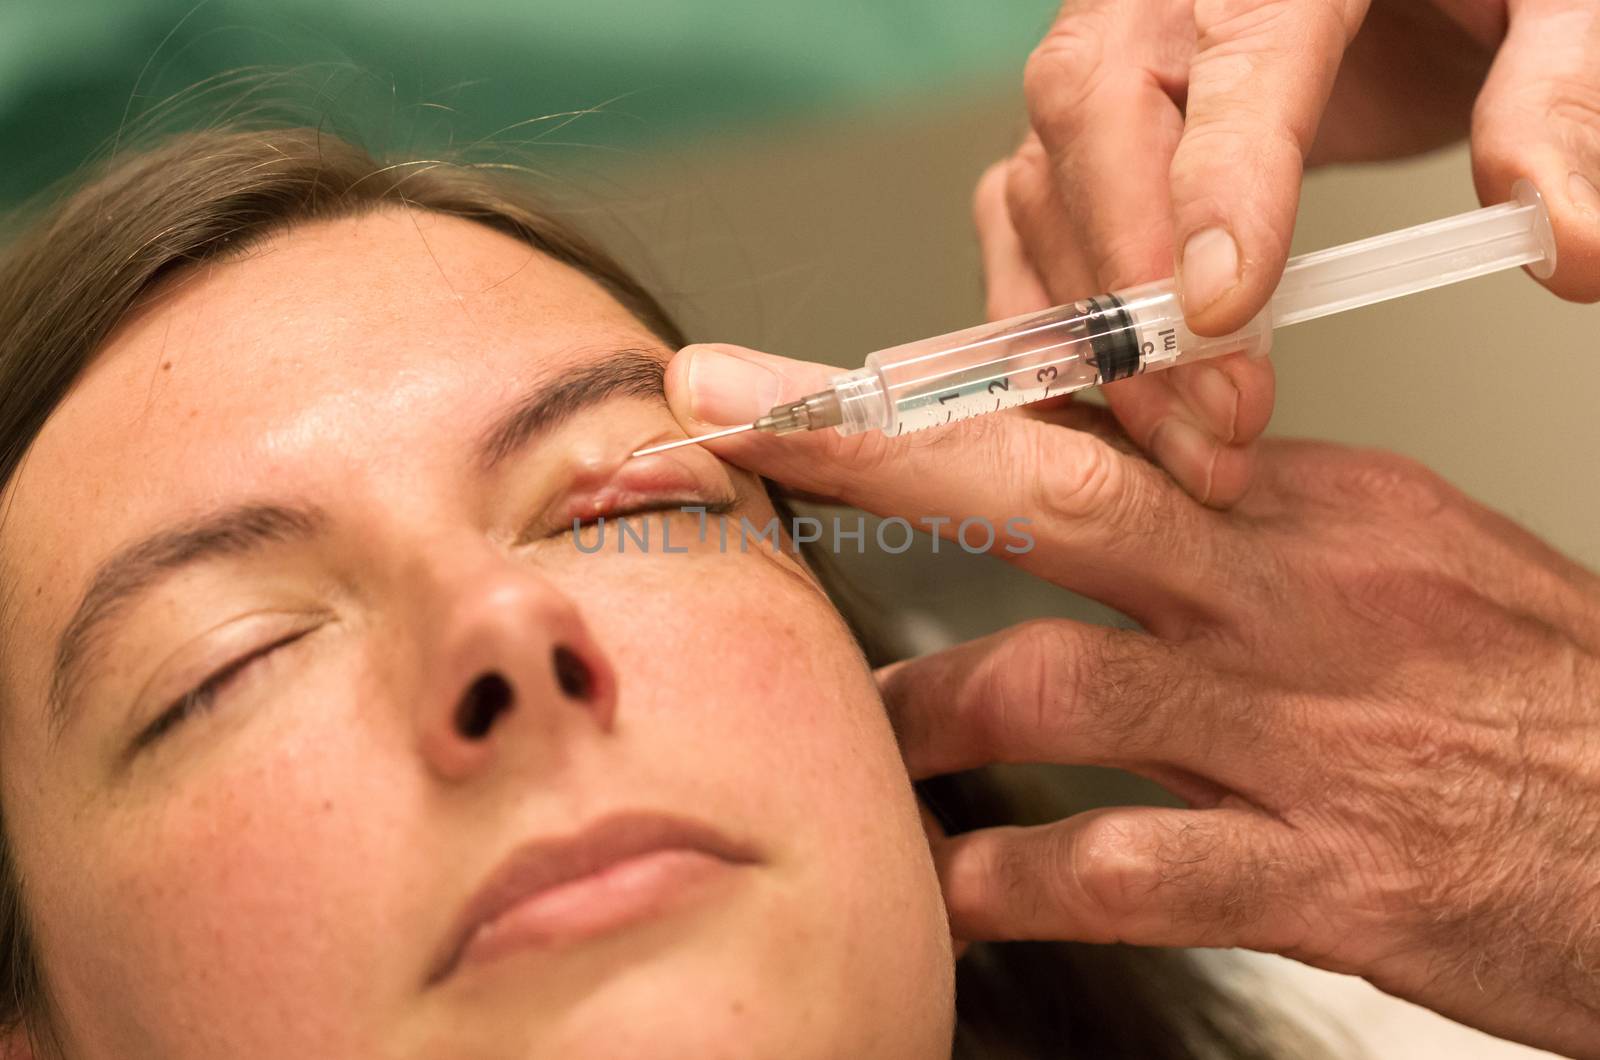 Healthcare concept - Anesthesia - Chalazion during eye examinati by michaklootwijk